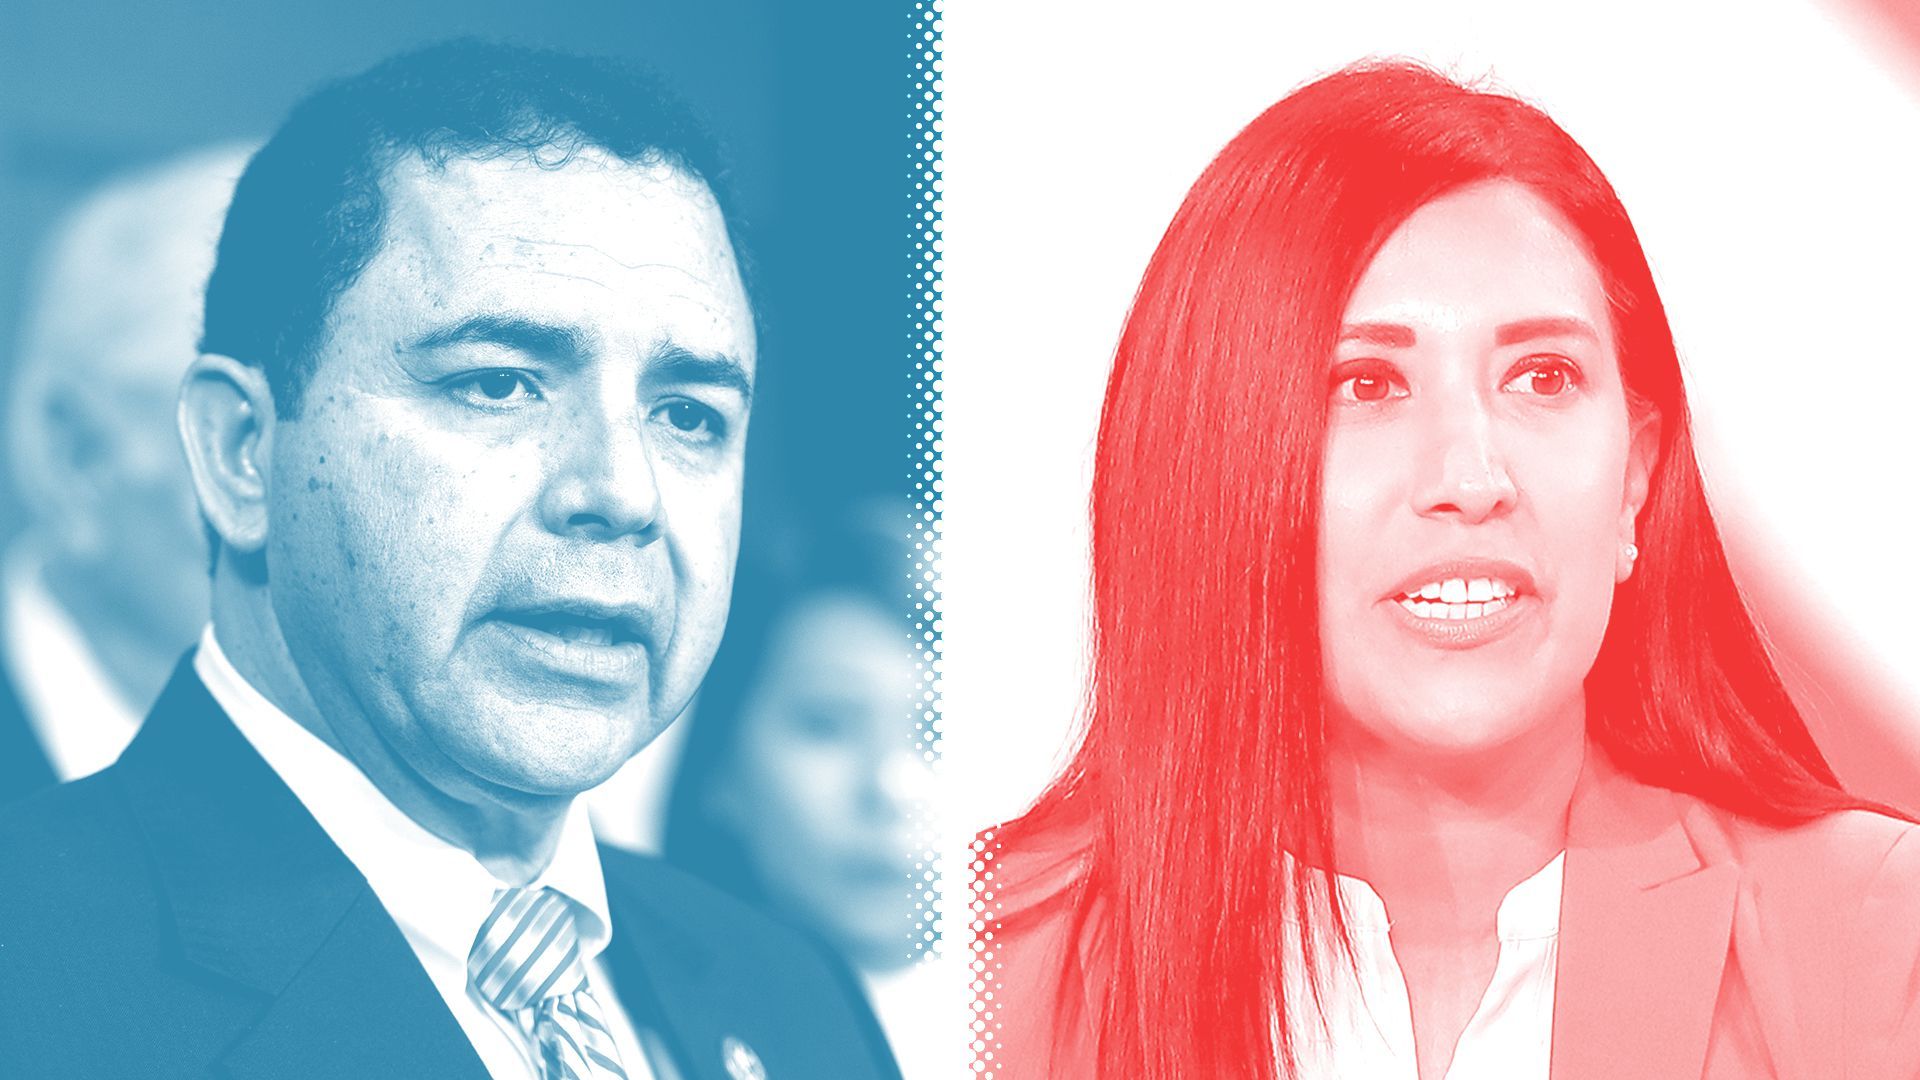 Photo illustration of Henry Cuellar tinted blue, and Cassy Garcia, tinted red, divided by a halftone line